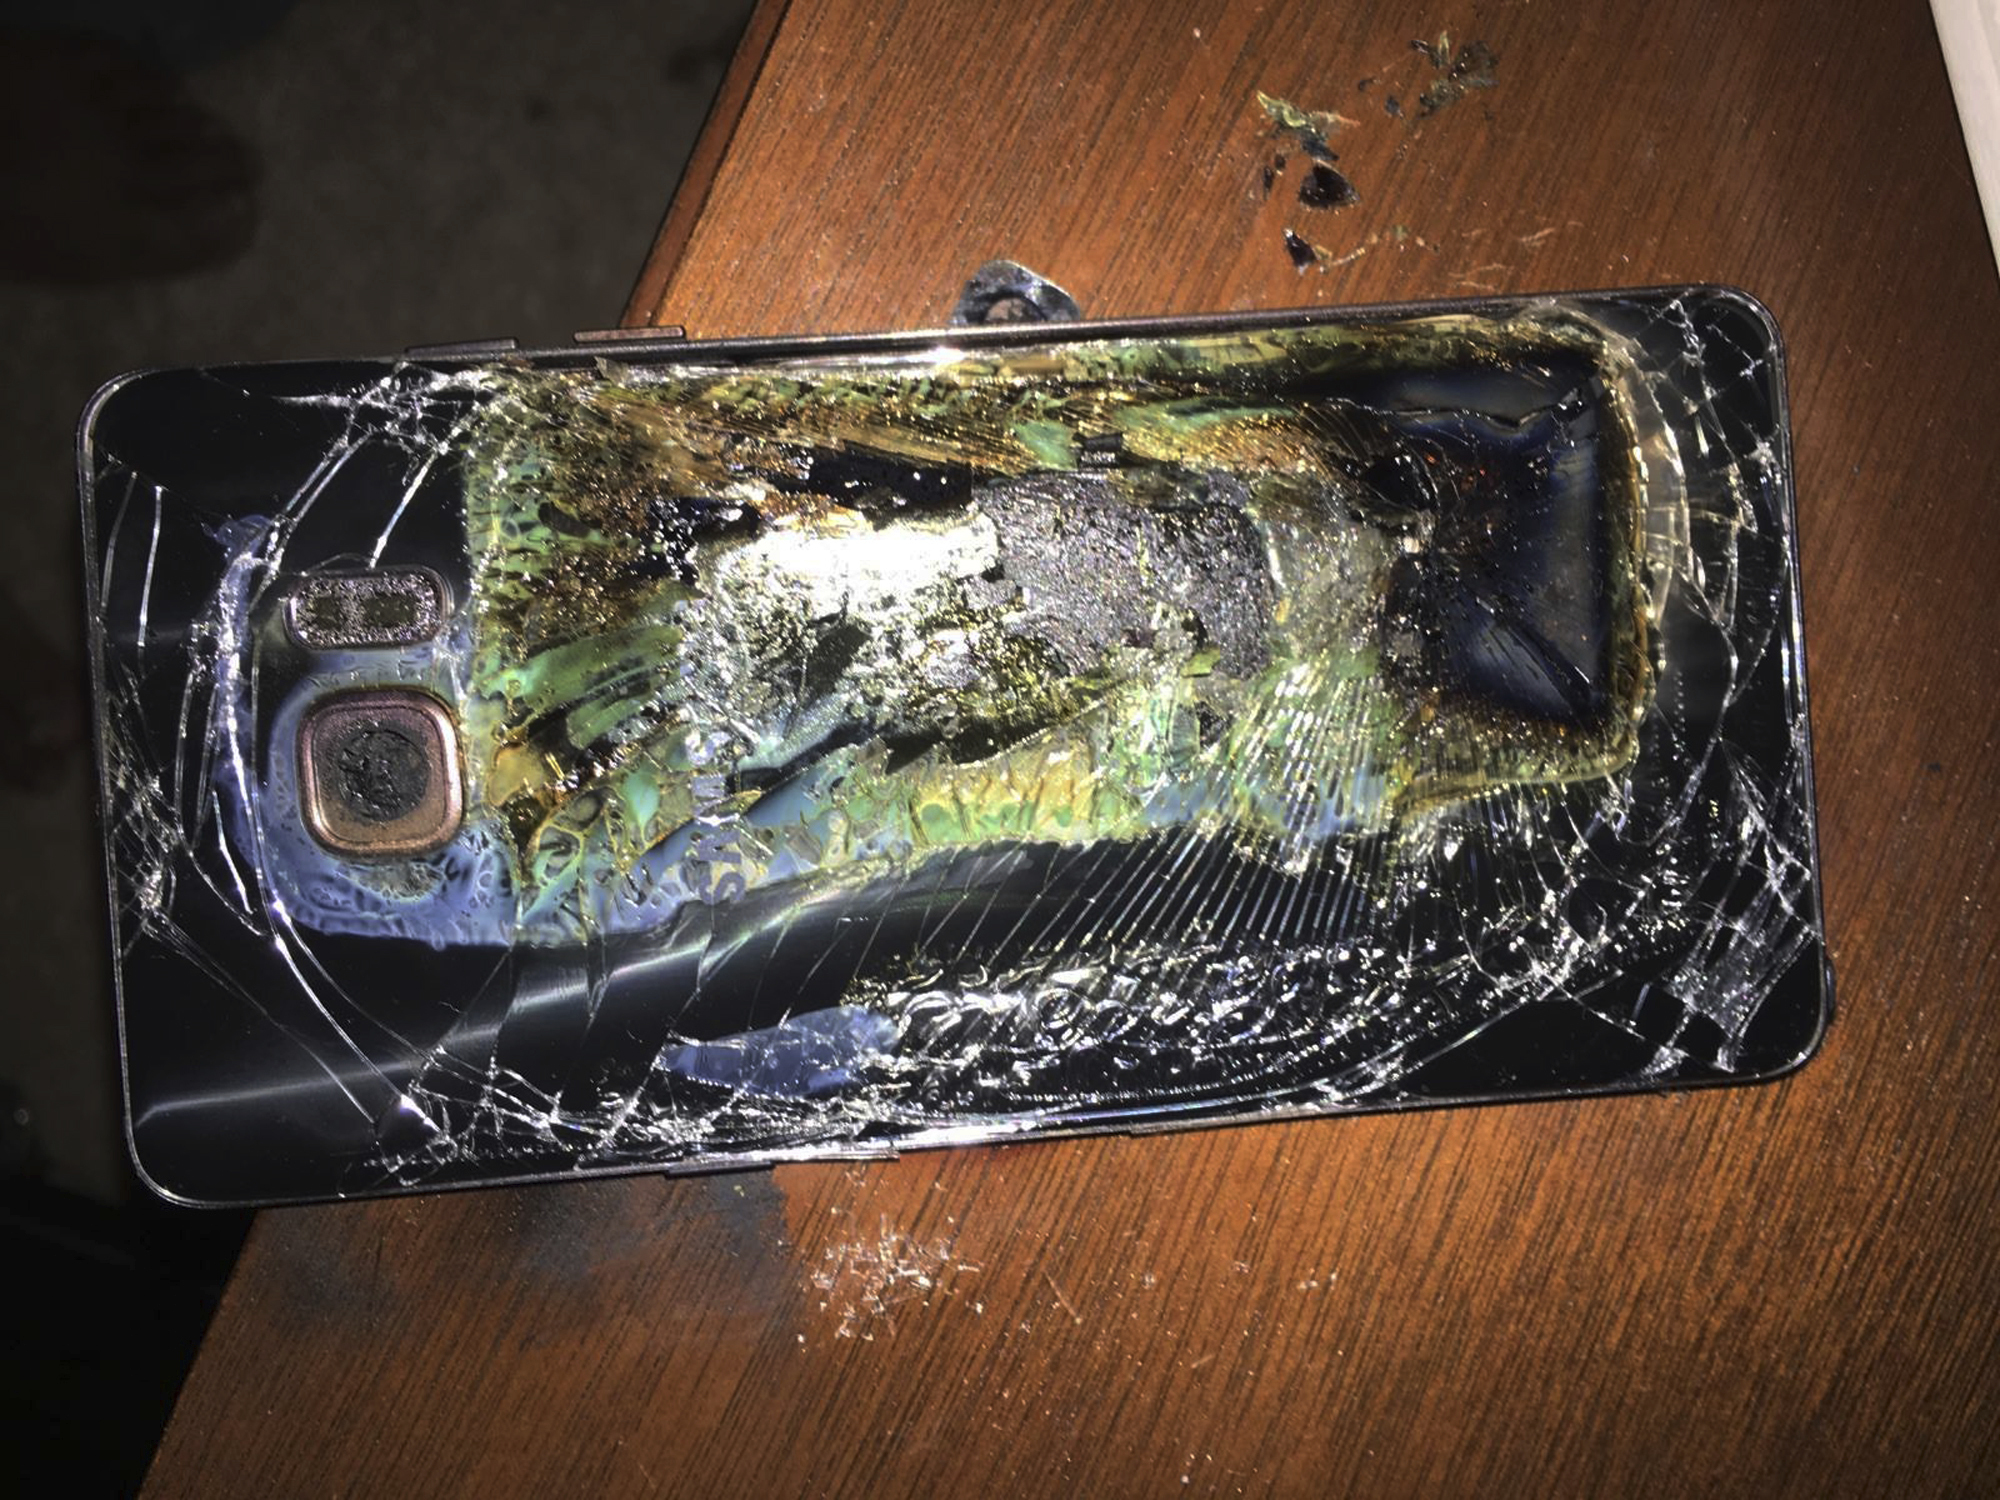 Taking a Samsung Galaxy Note 7 on a plane could cost you almost $180,000 and up to 10 years in prison.